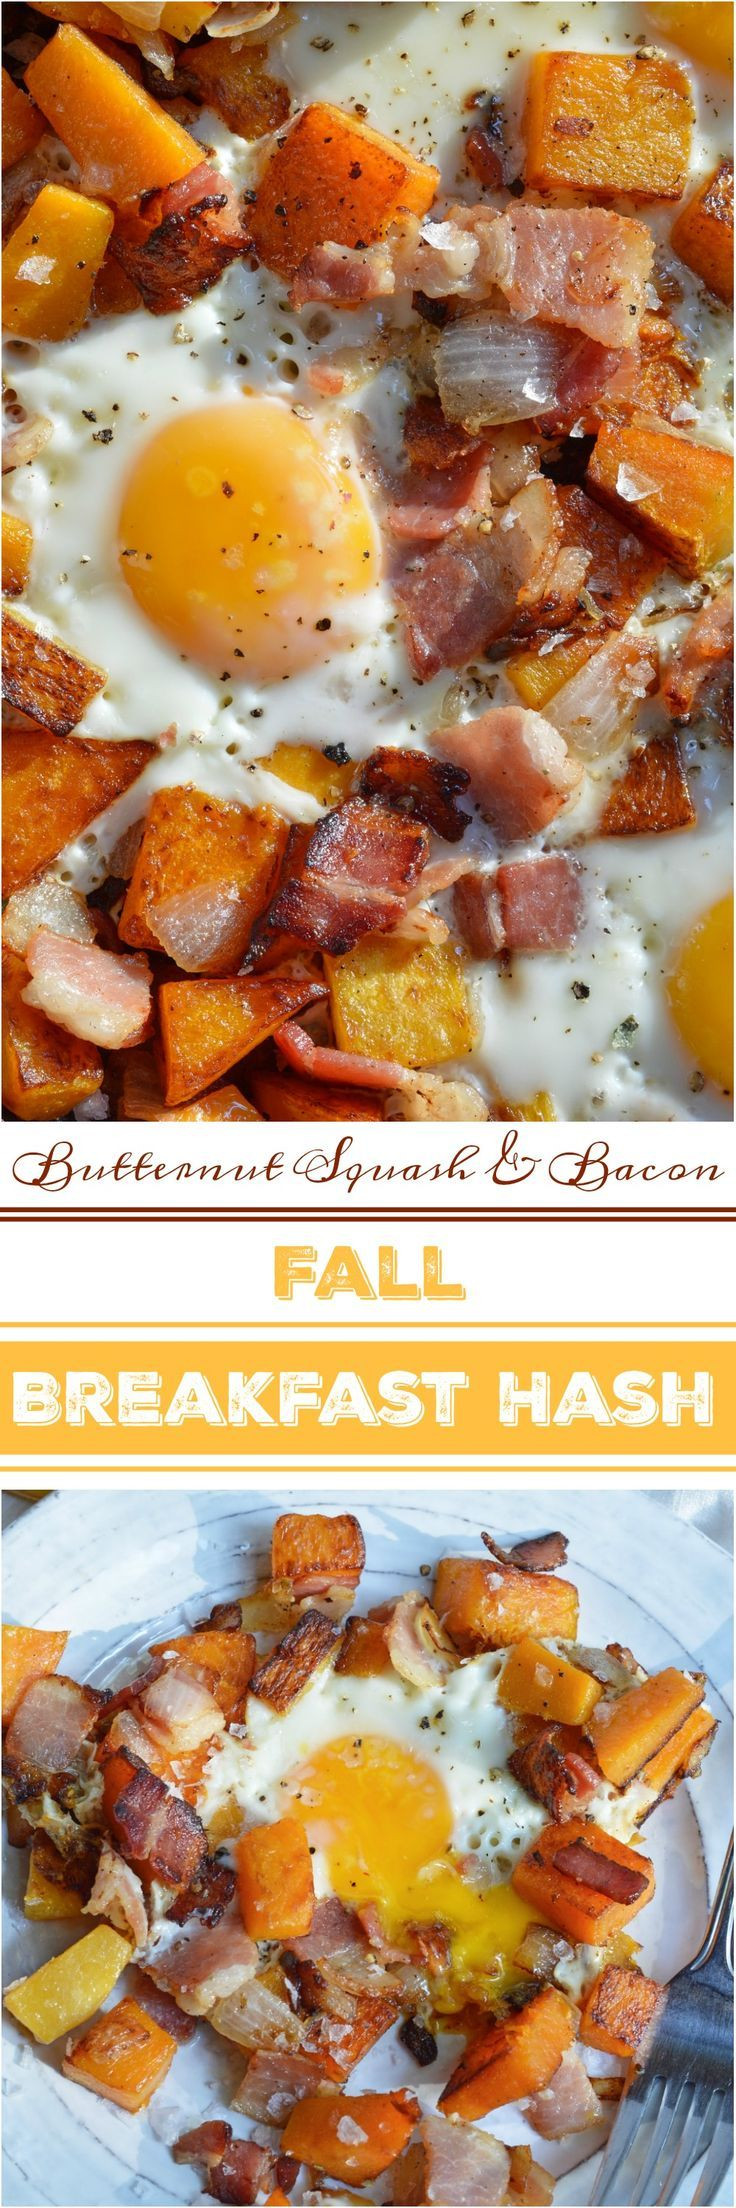 Fall Breakfast Recipe
 The air is ting chilly and it is time for cozy fort